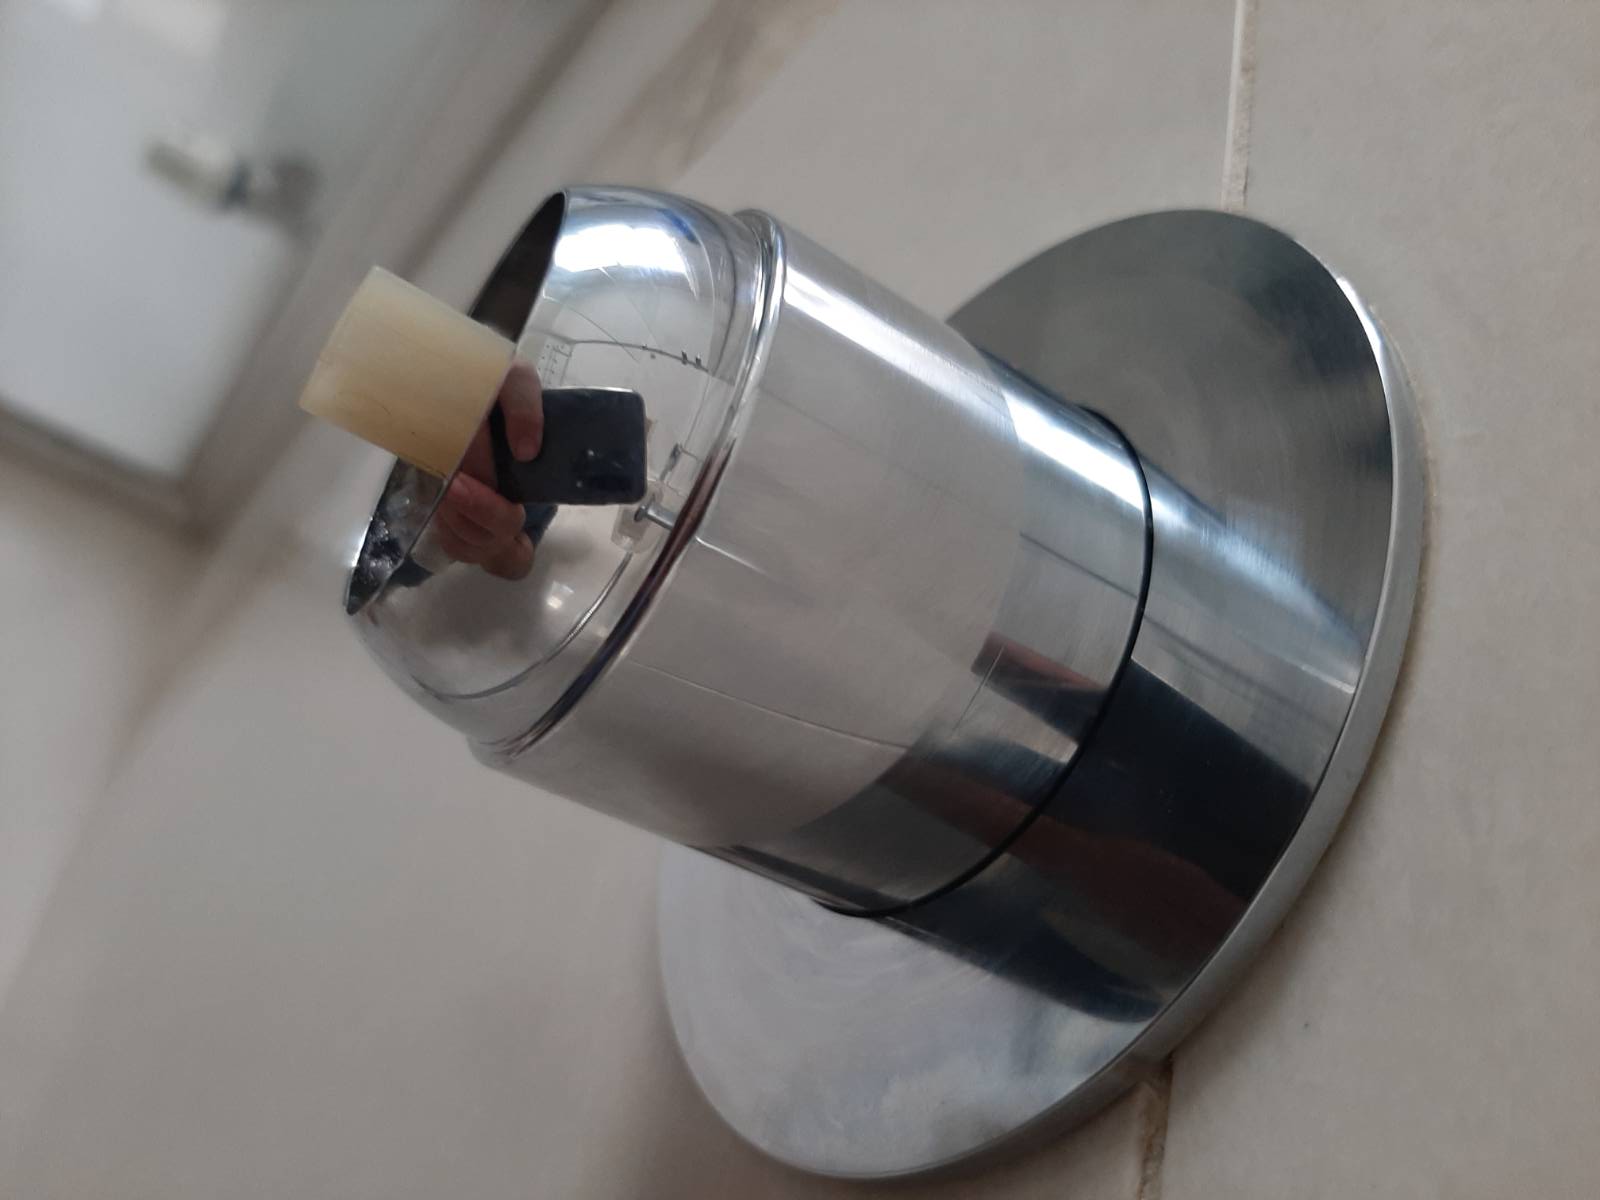 Hansa Shower Mixer (cover stuck, how to remove?)